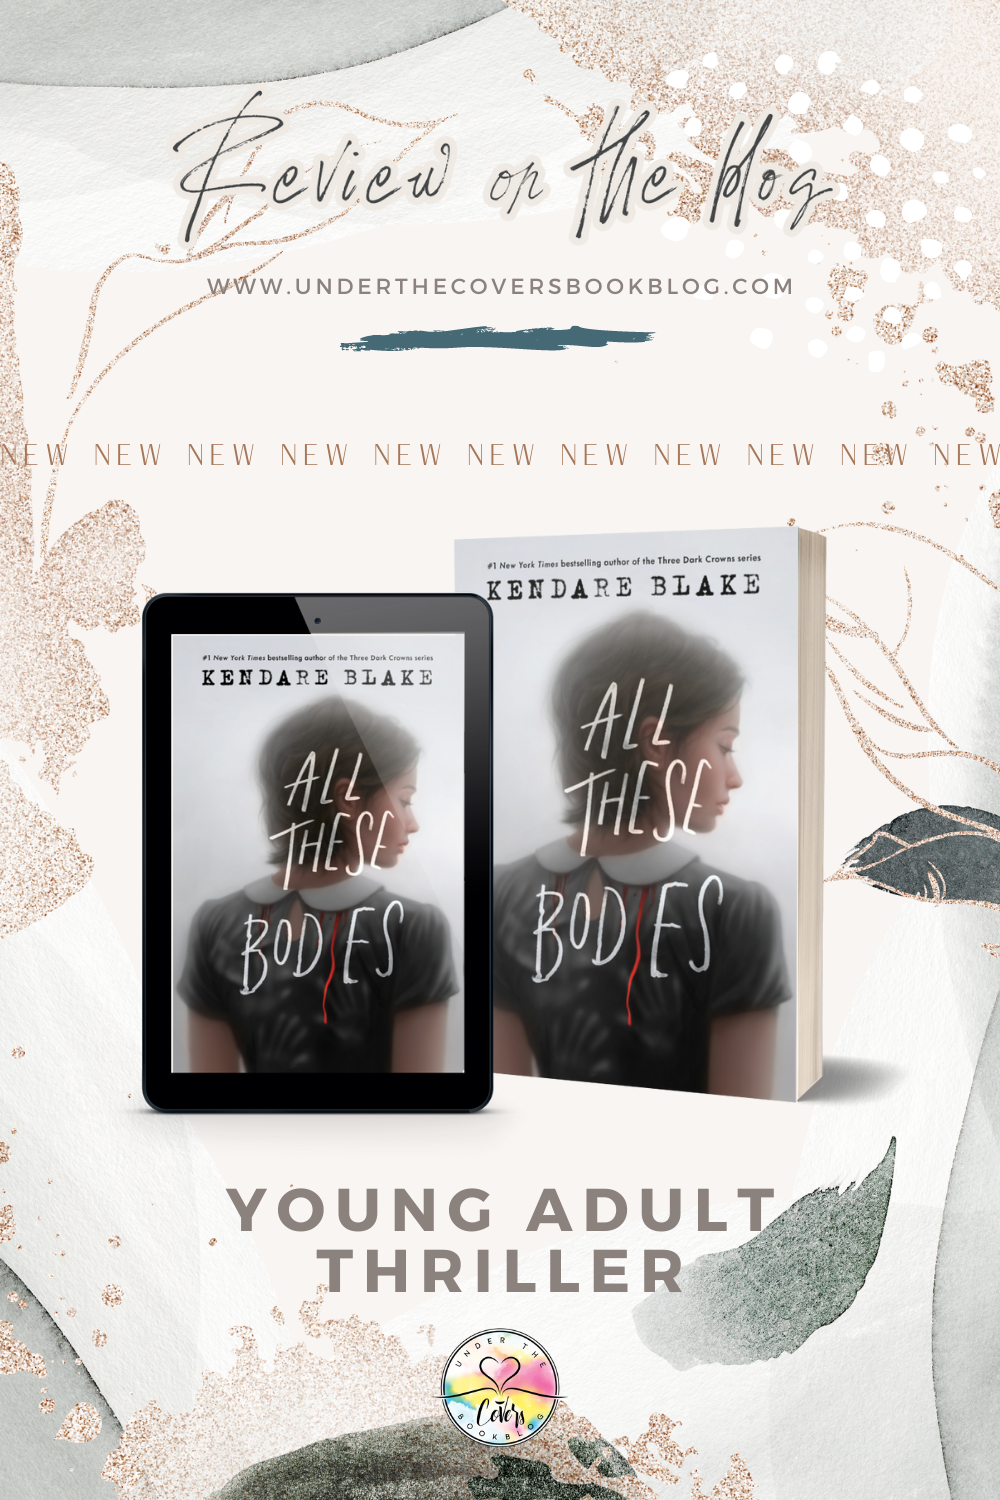 ARC Review: All These Bodies by Kendare Blake